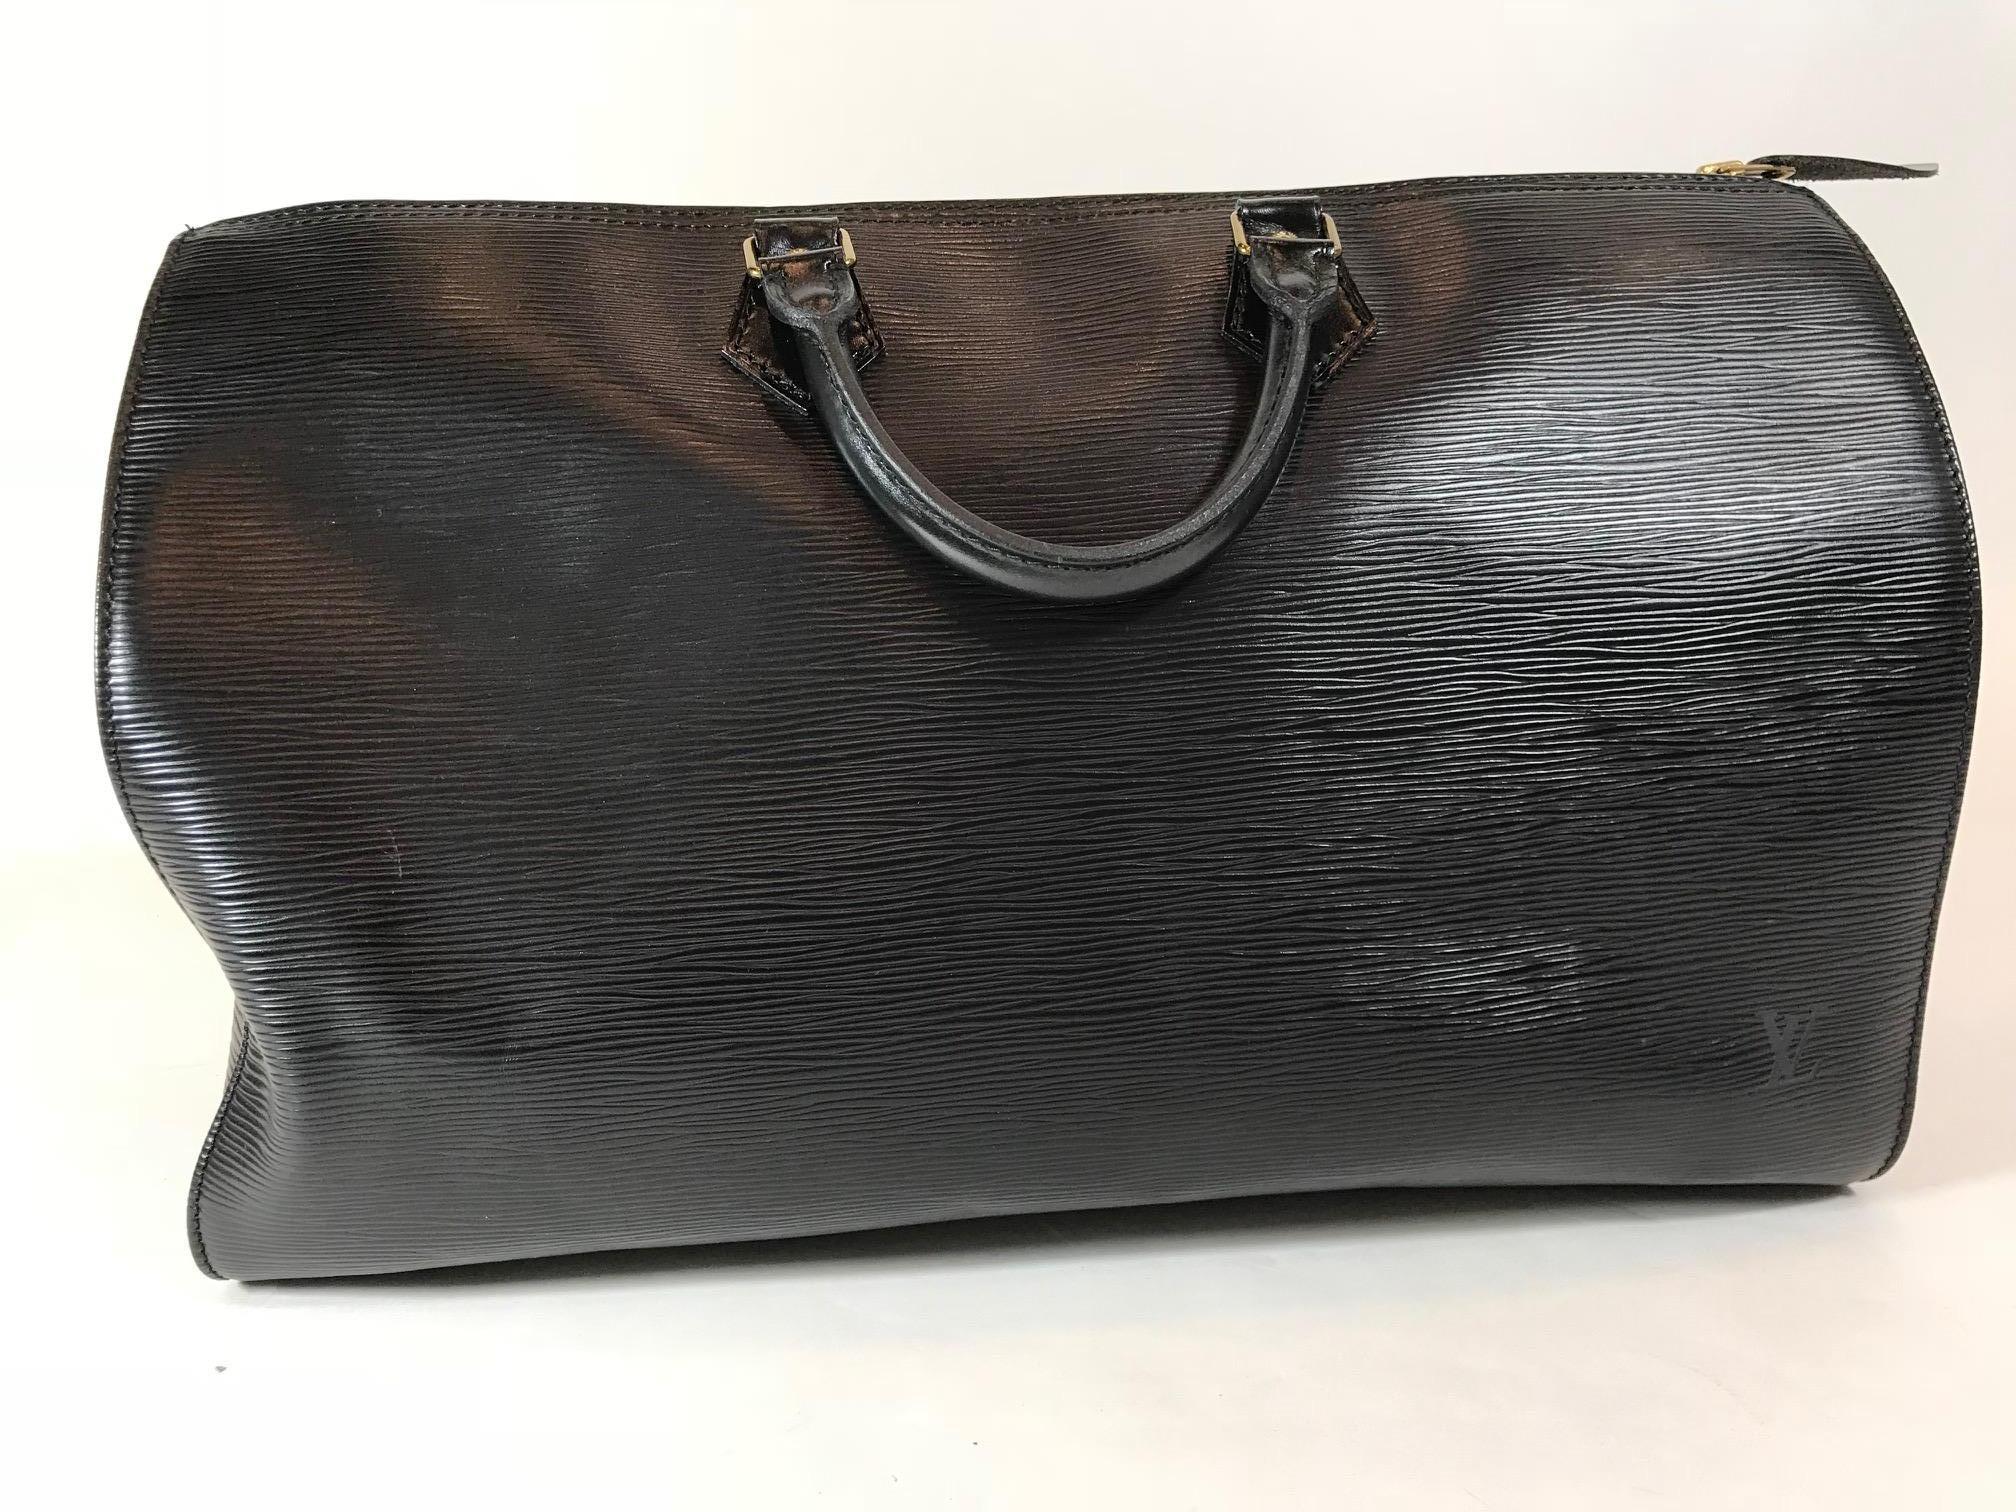 Black Epi leather Louis Vuitton Speedy 40 with silver-tone hardware, dual rolled top handles, single slit pocket at side, tonal canvas lining, dual slit pockets at interior wall and zip closure at top.